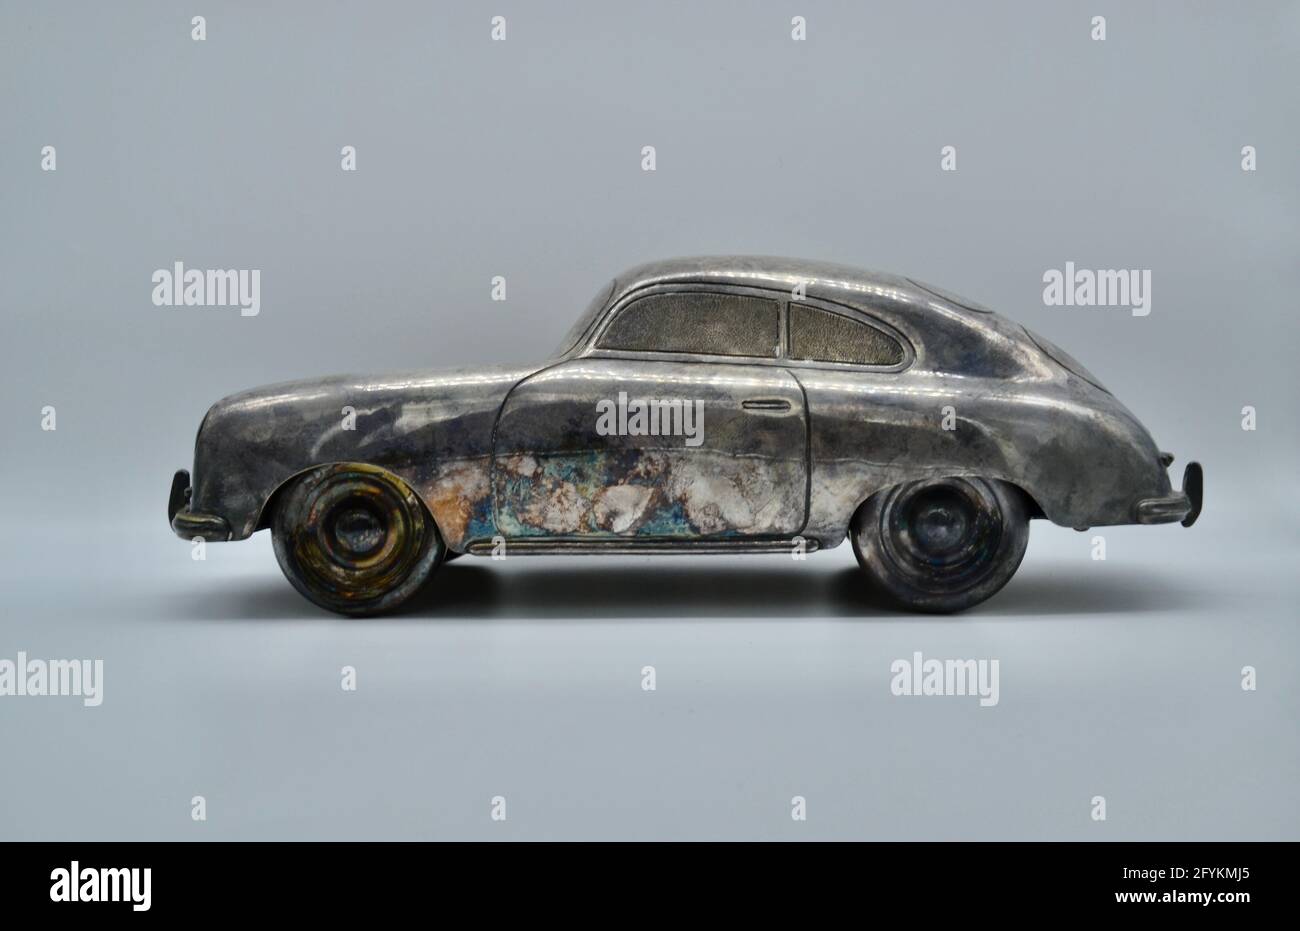 Side view of vintage toy metal Porsche 356 sports car in studio shot on white background Stock Photo